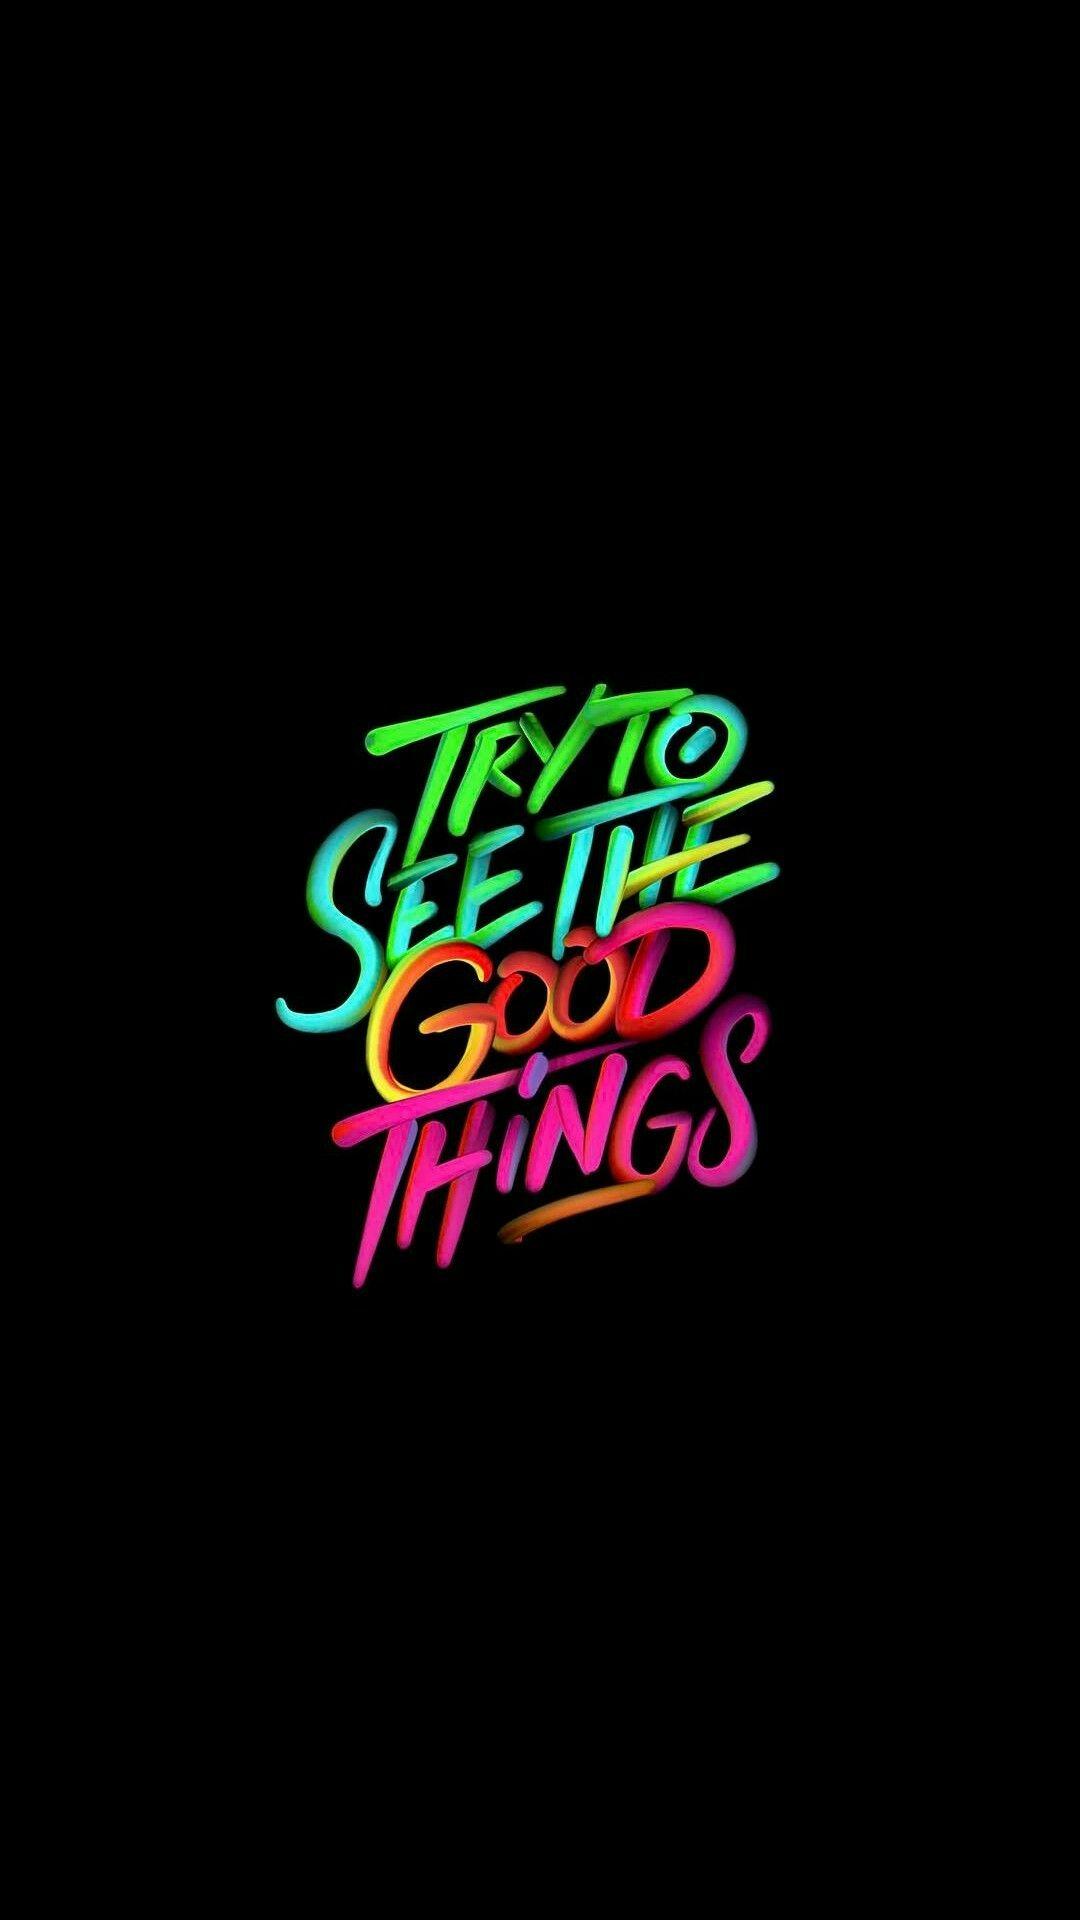 Try To See The Good Things. Wallpaper quotes, Swag quotes